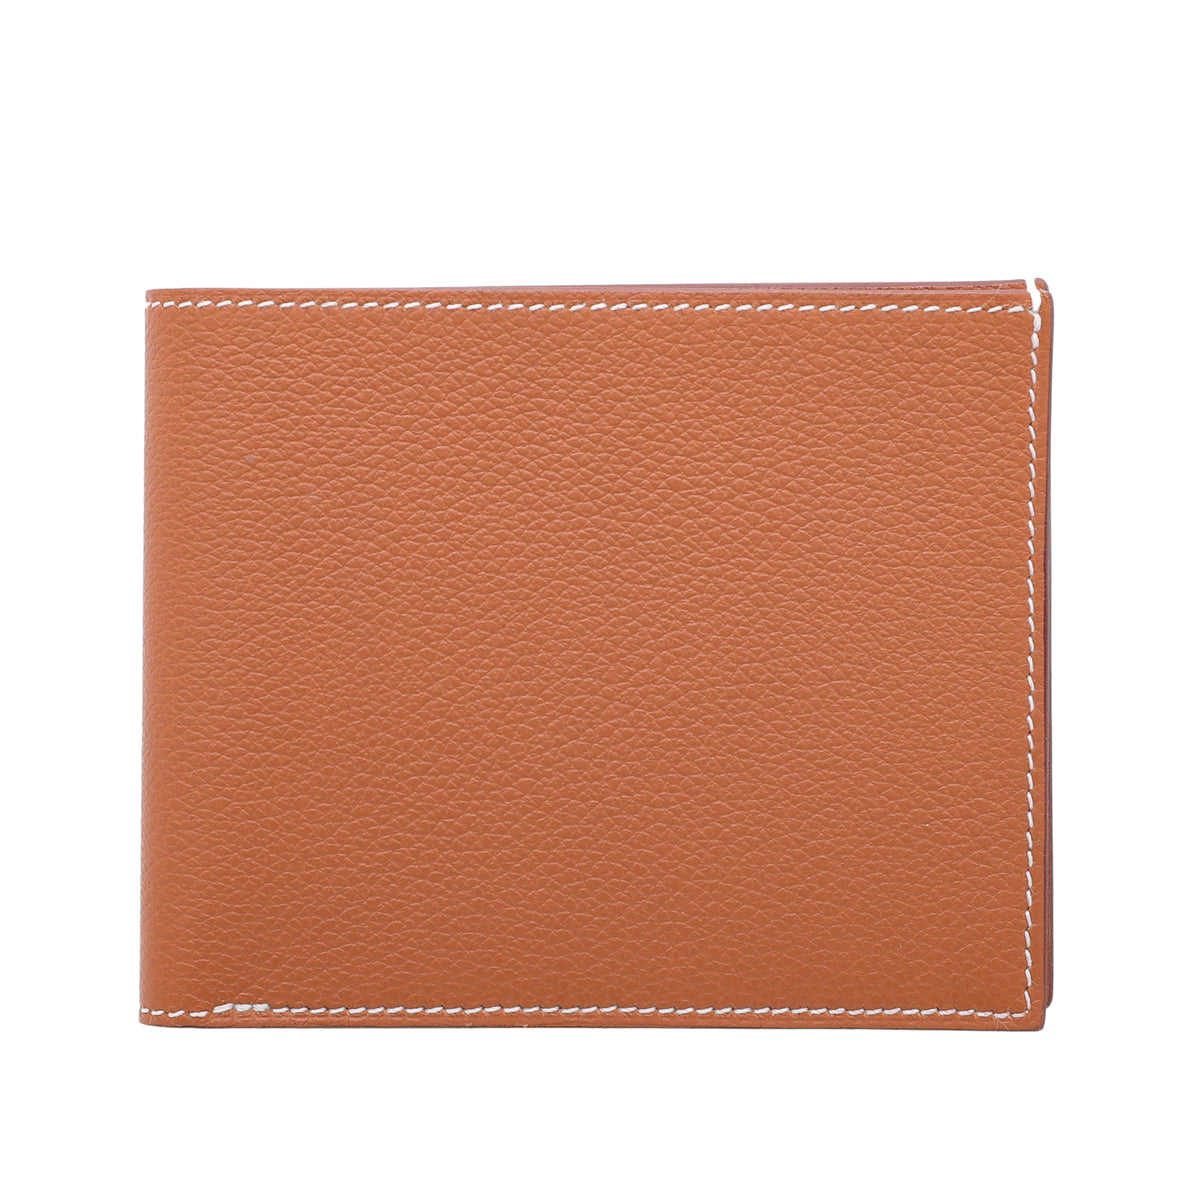 Hermes Gold Citizen Twill Evercolor Compact Wallet